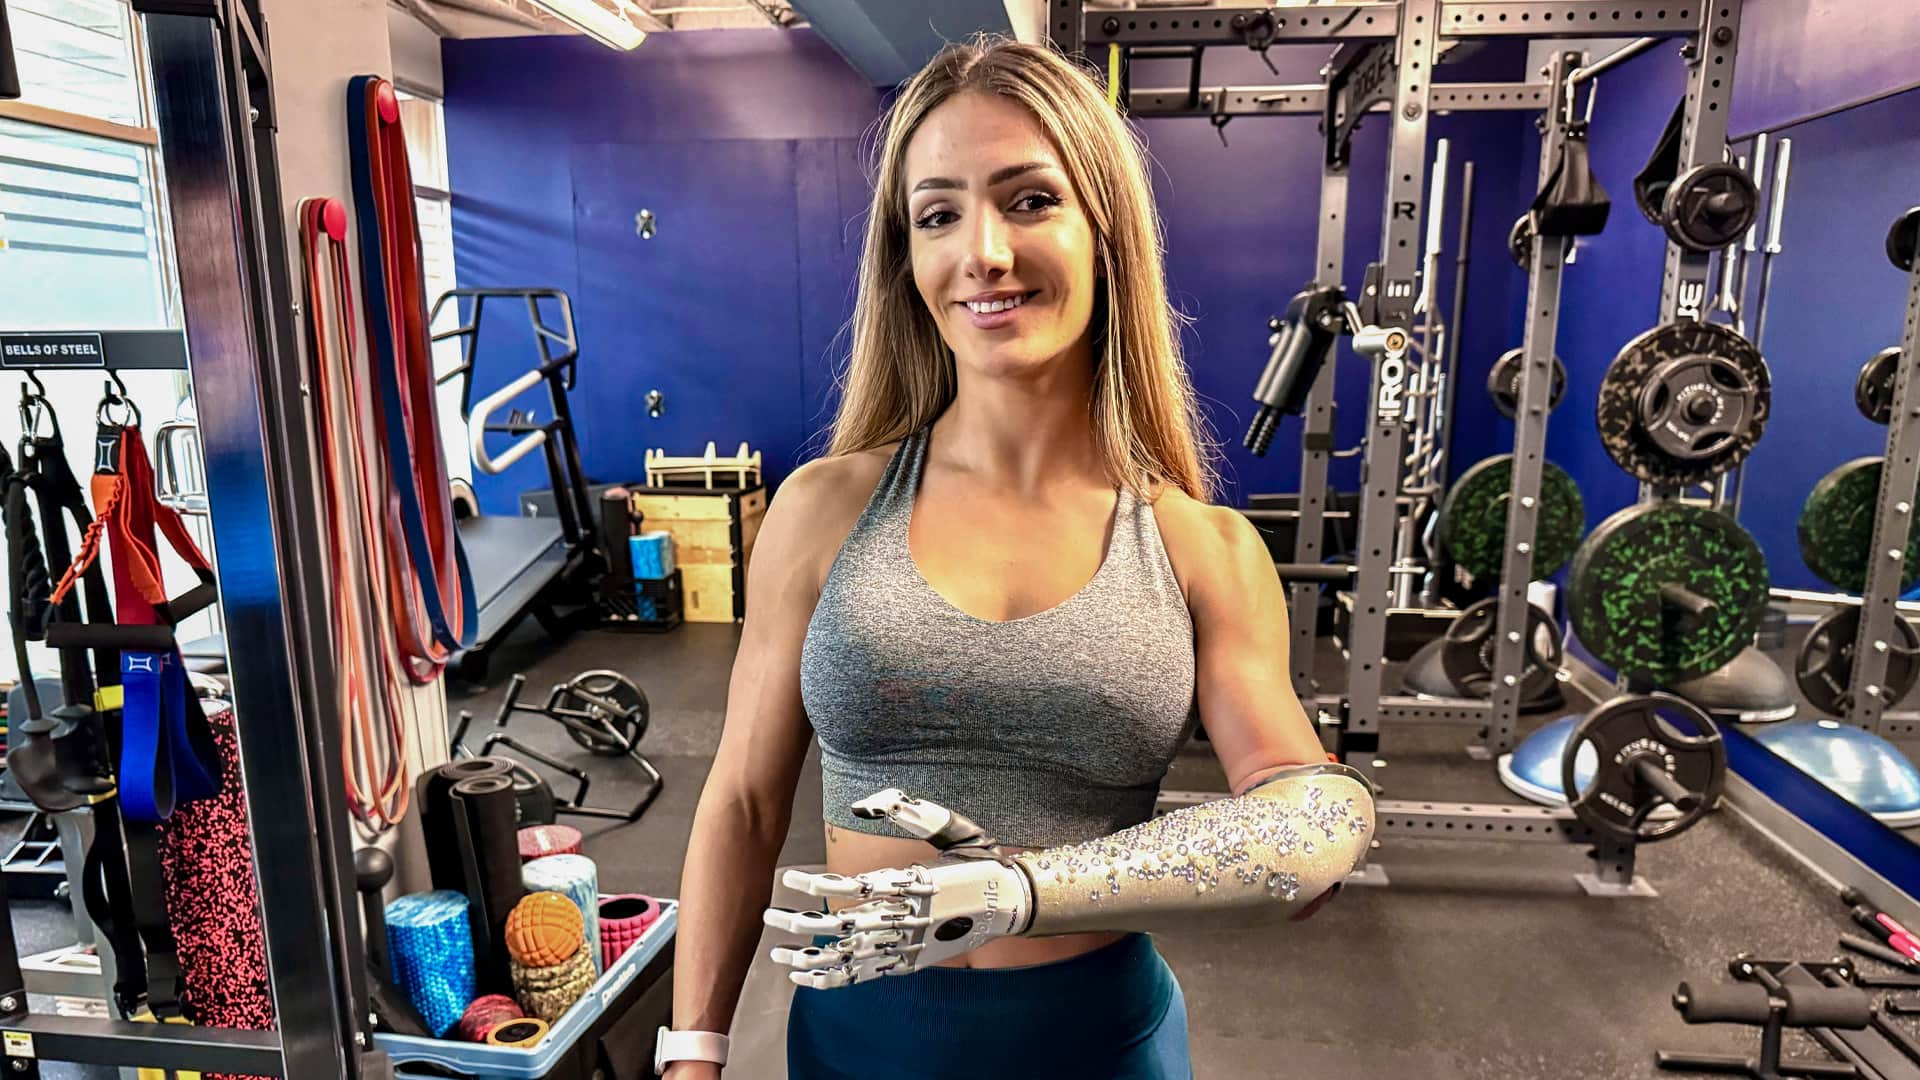 Bodybuilder with bionic prosthetic 'an inspiration' as gym trainer